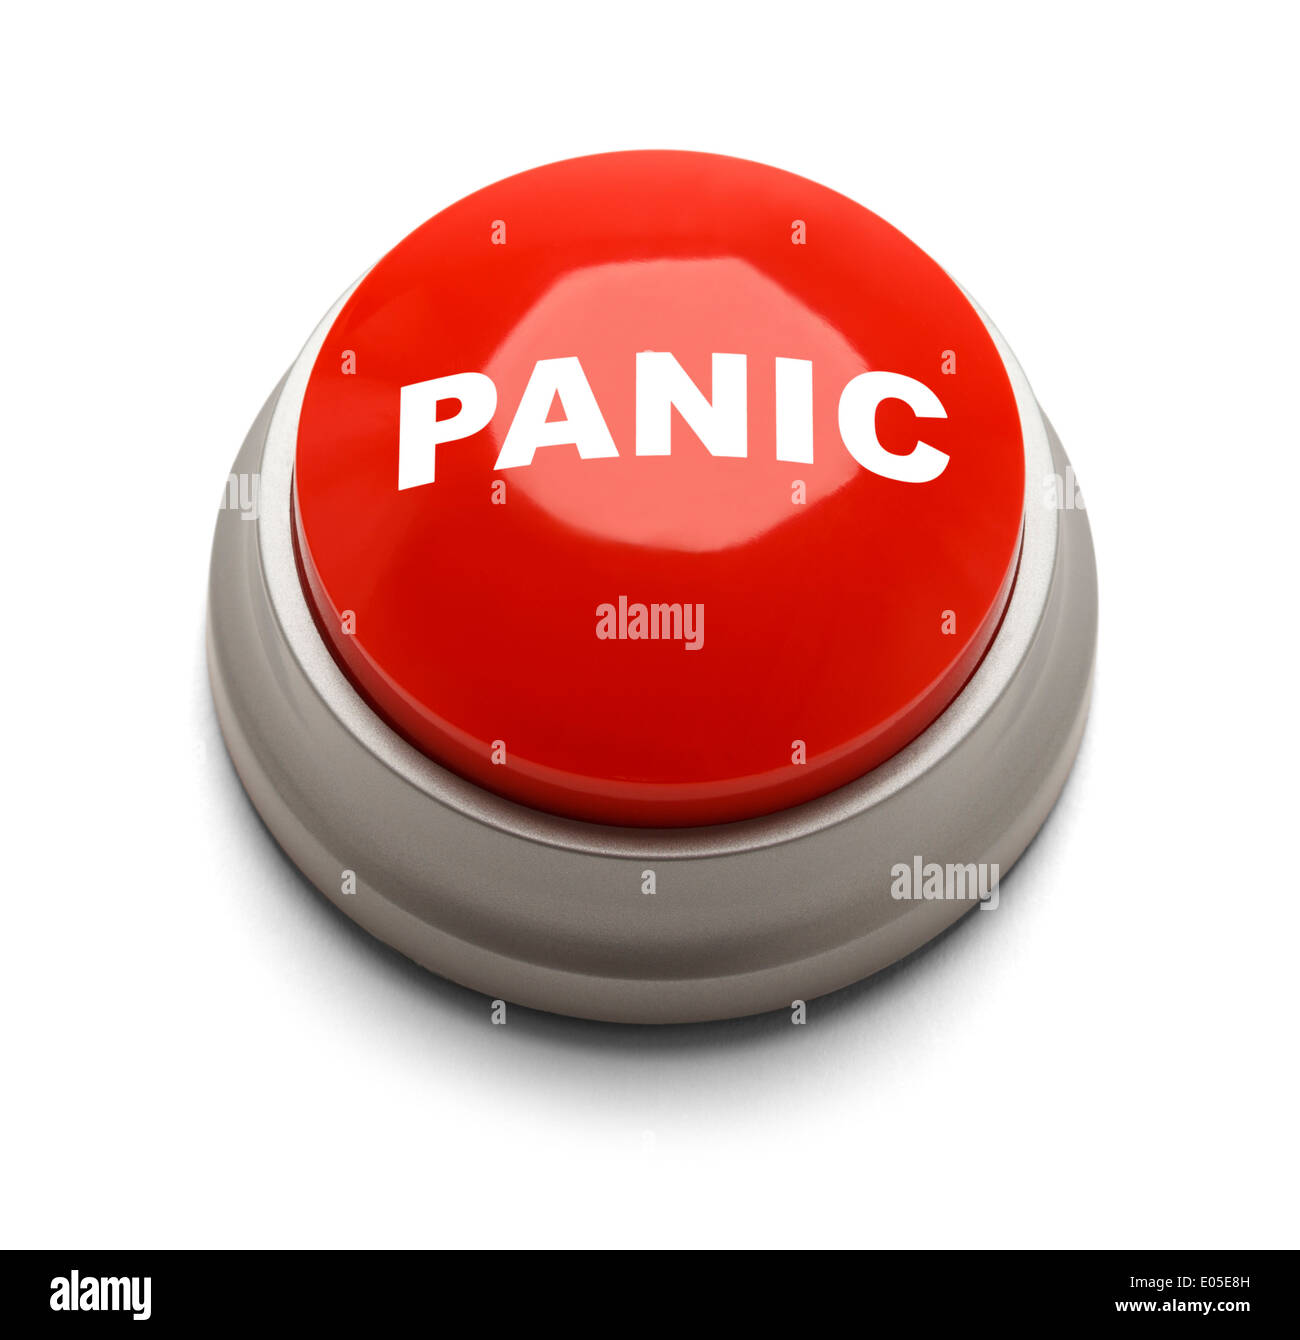 Red round button with panic printed on it isolated on a white background. Stock Photo